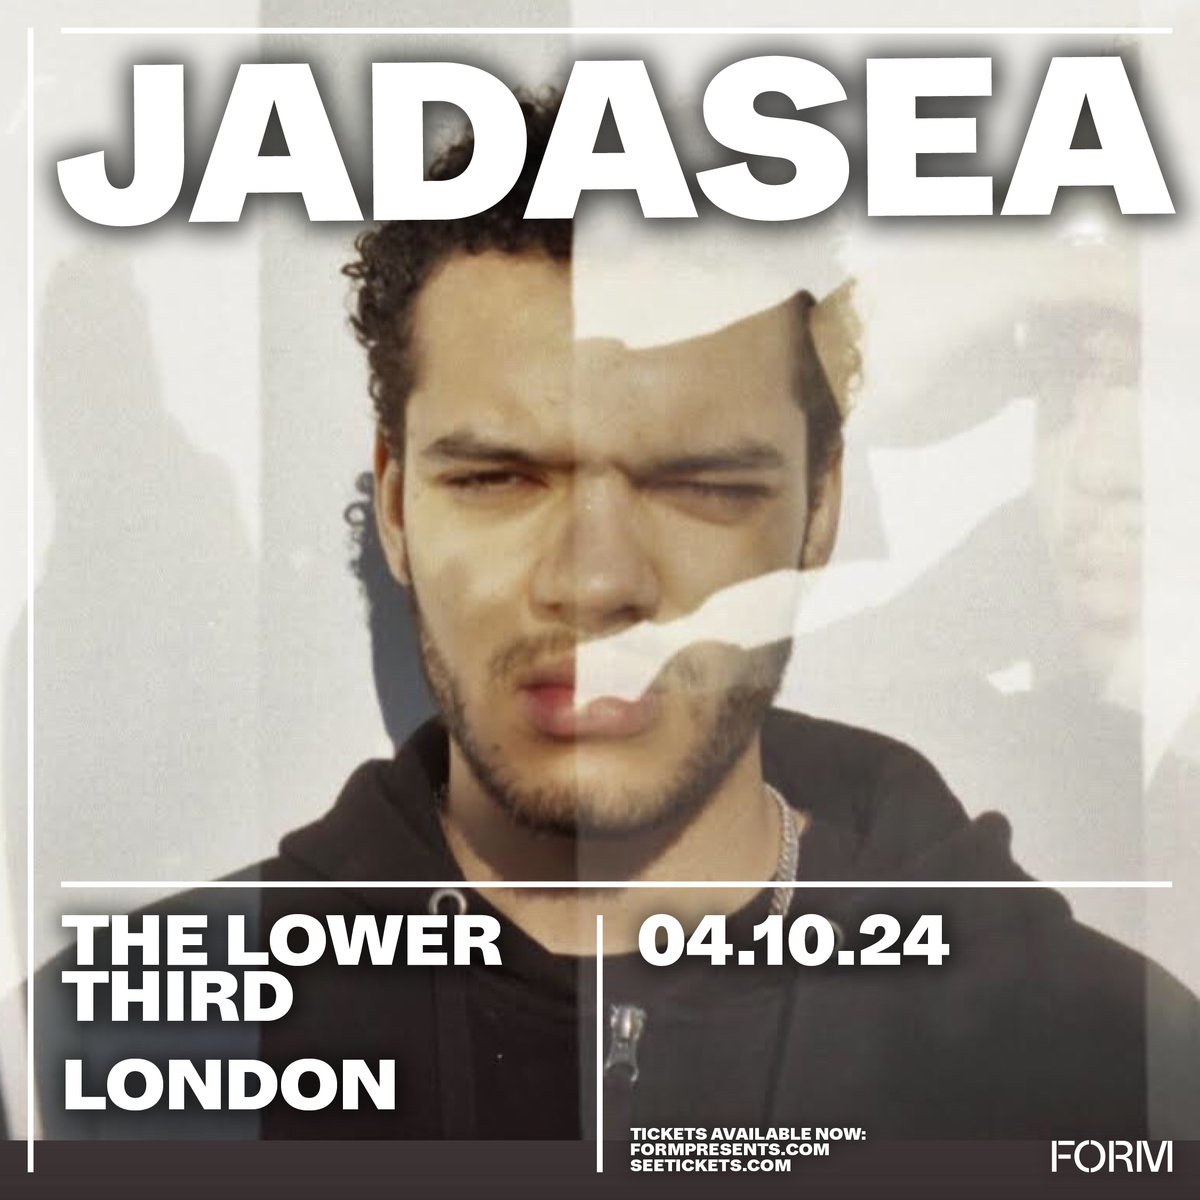 A crucial fixture in the South London hip hop scene, @jadasea1 headlines @lowerthirdsoho, London on 4th October! 🎟 Tickets are on sale now: formpresents.seetickets.com/event/jadasea/…